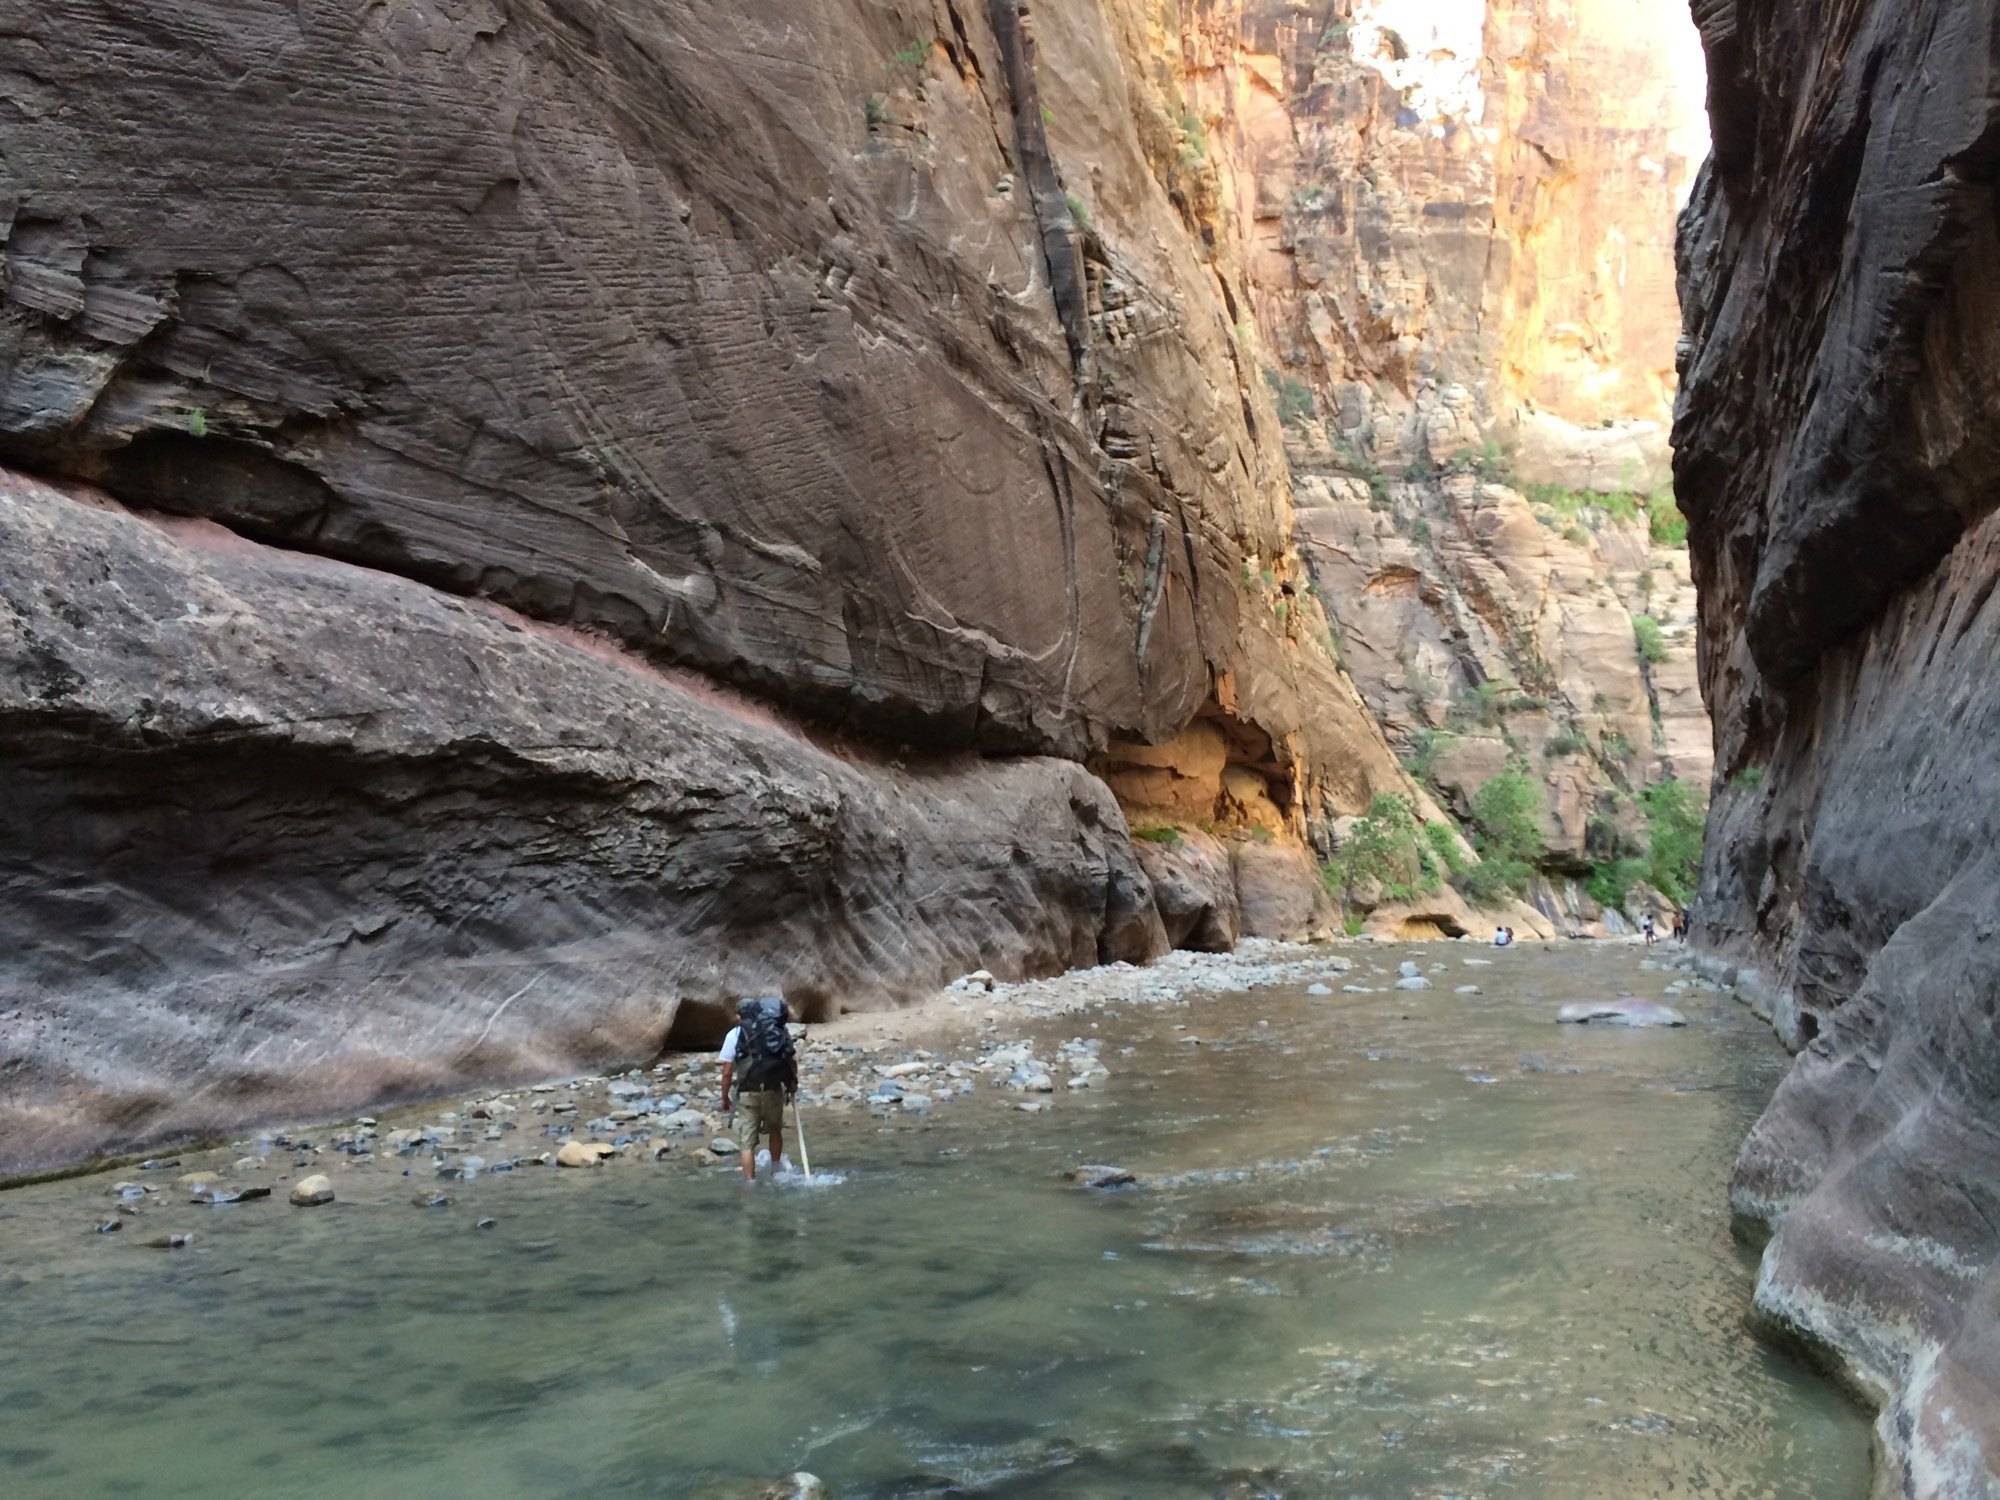 The Zion Narrows // Explore Utah National Parks in this 9-day road trip itinerary with the best hikes, activities & camping in Zion, Bryce, Capitol Reef, Arches & Canyonlands.